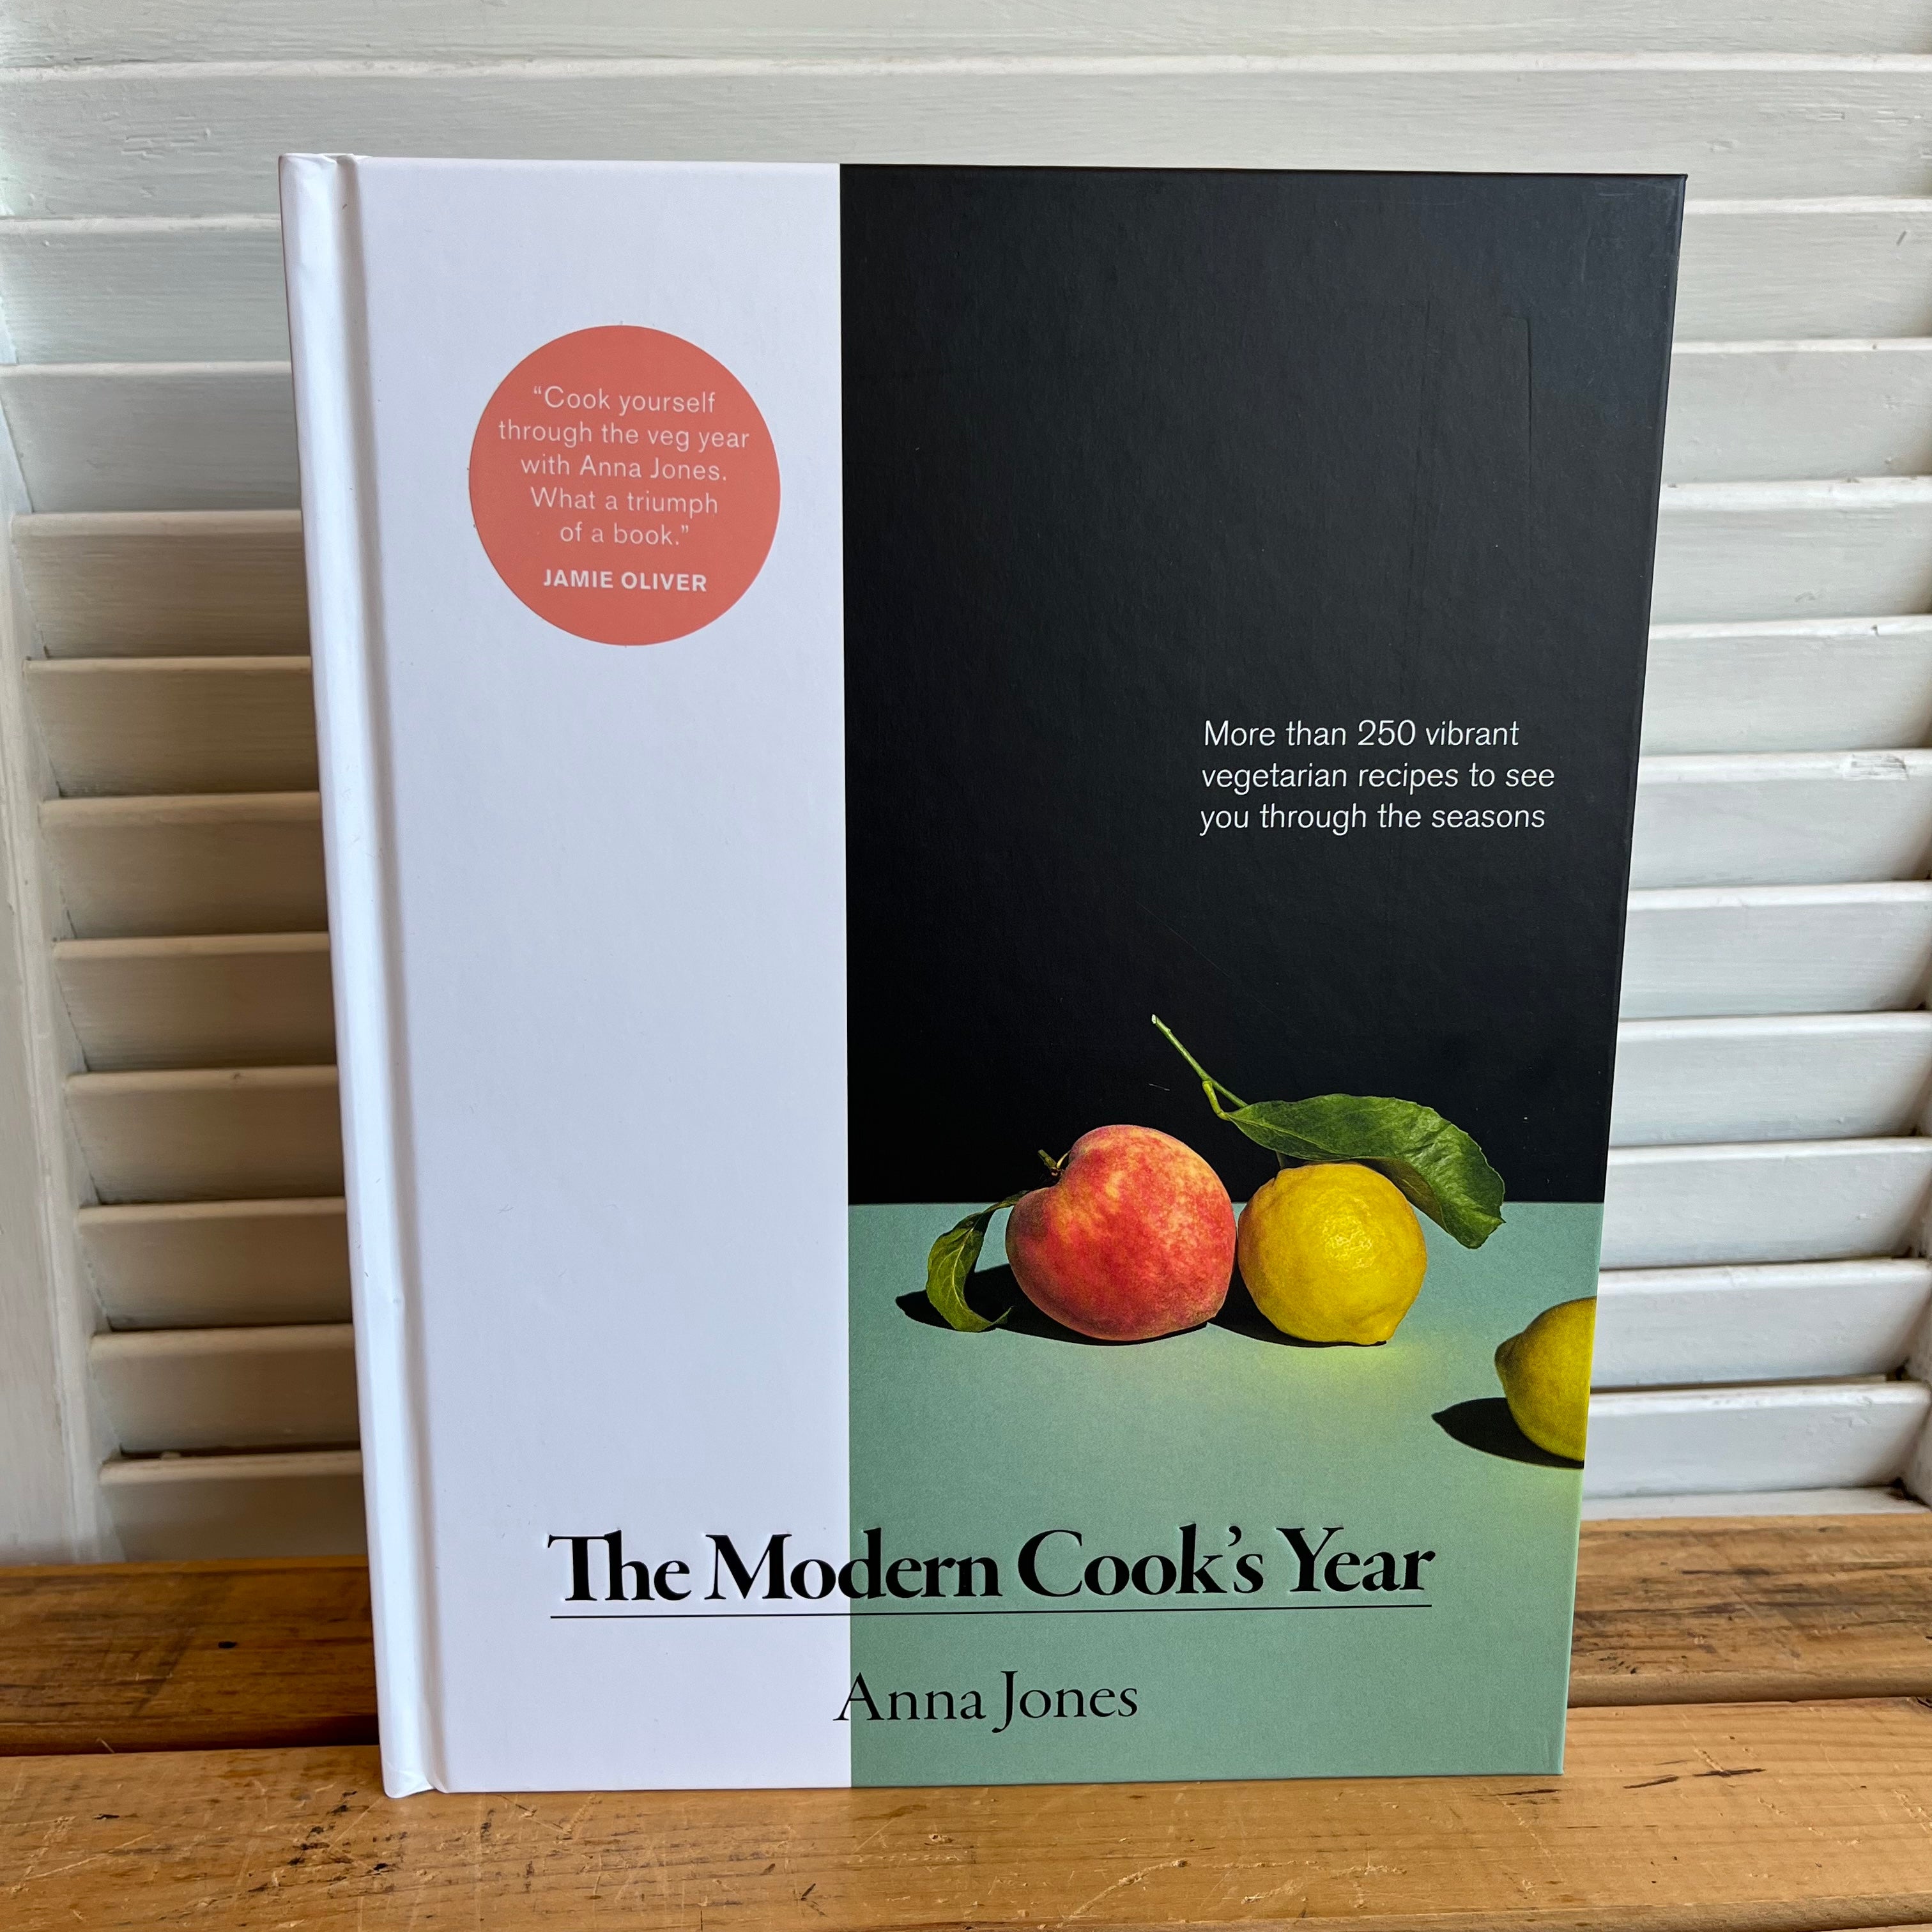 The Modern Cook's Year by Anna Jones